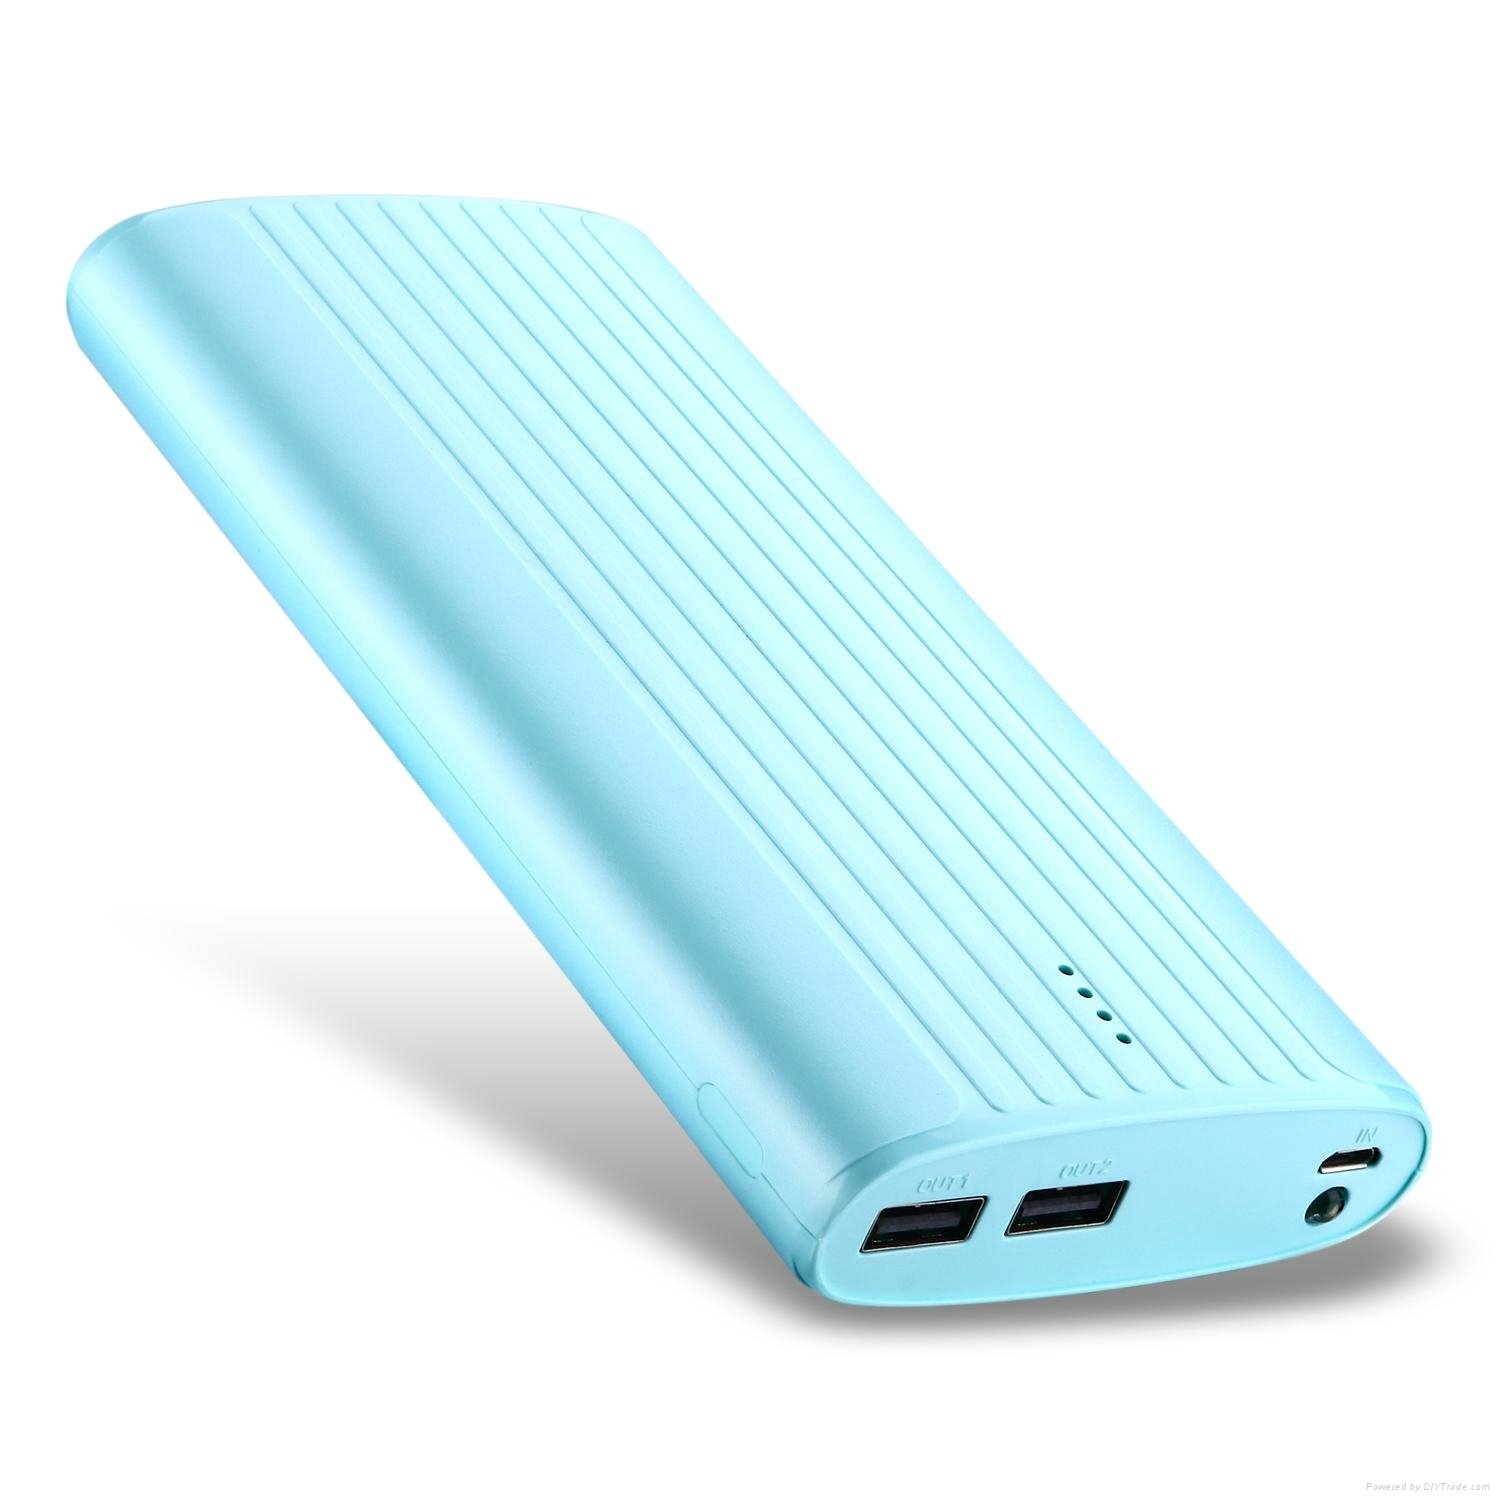 Dual ports power bank charger for iPhone6 4